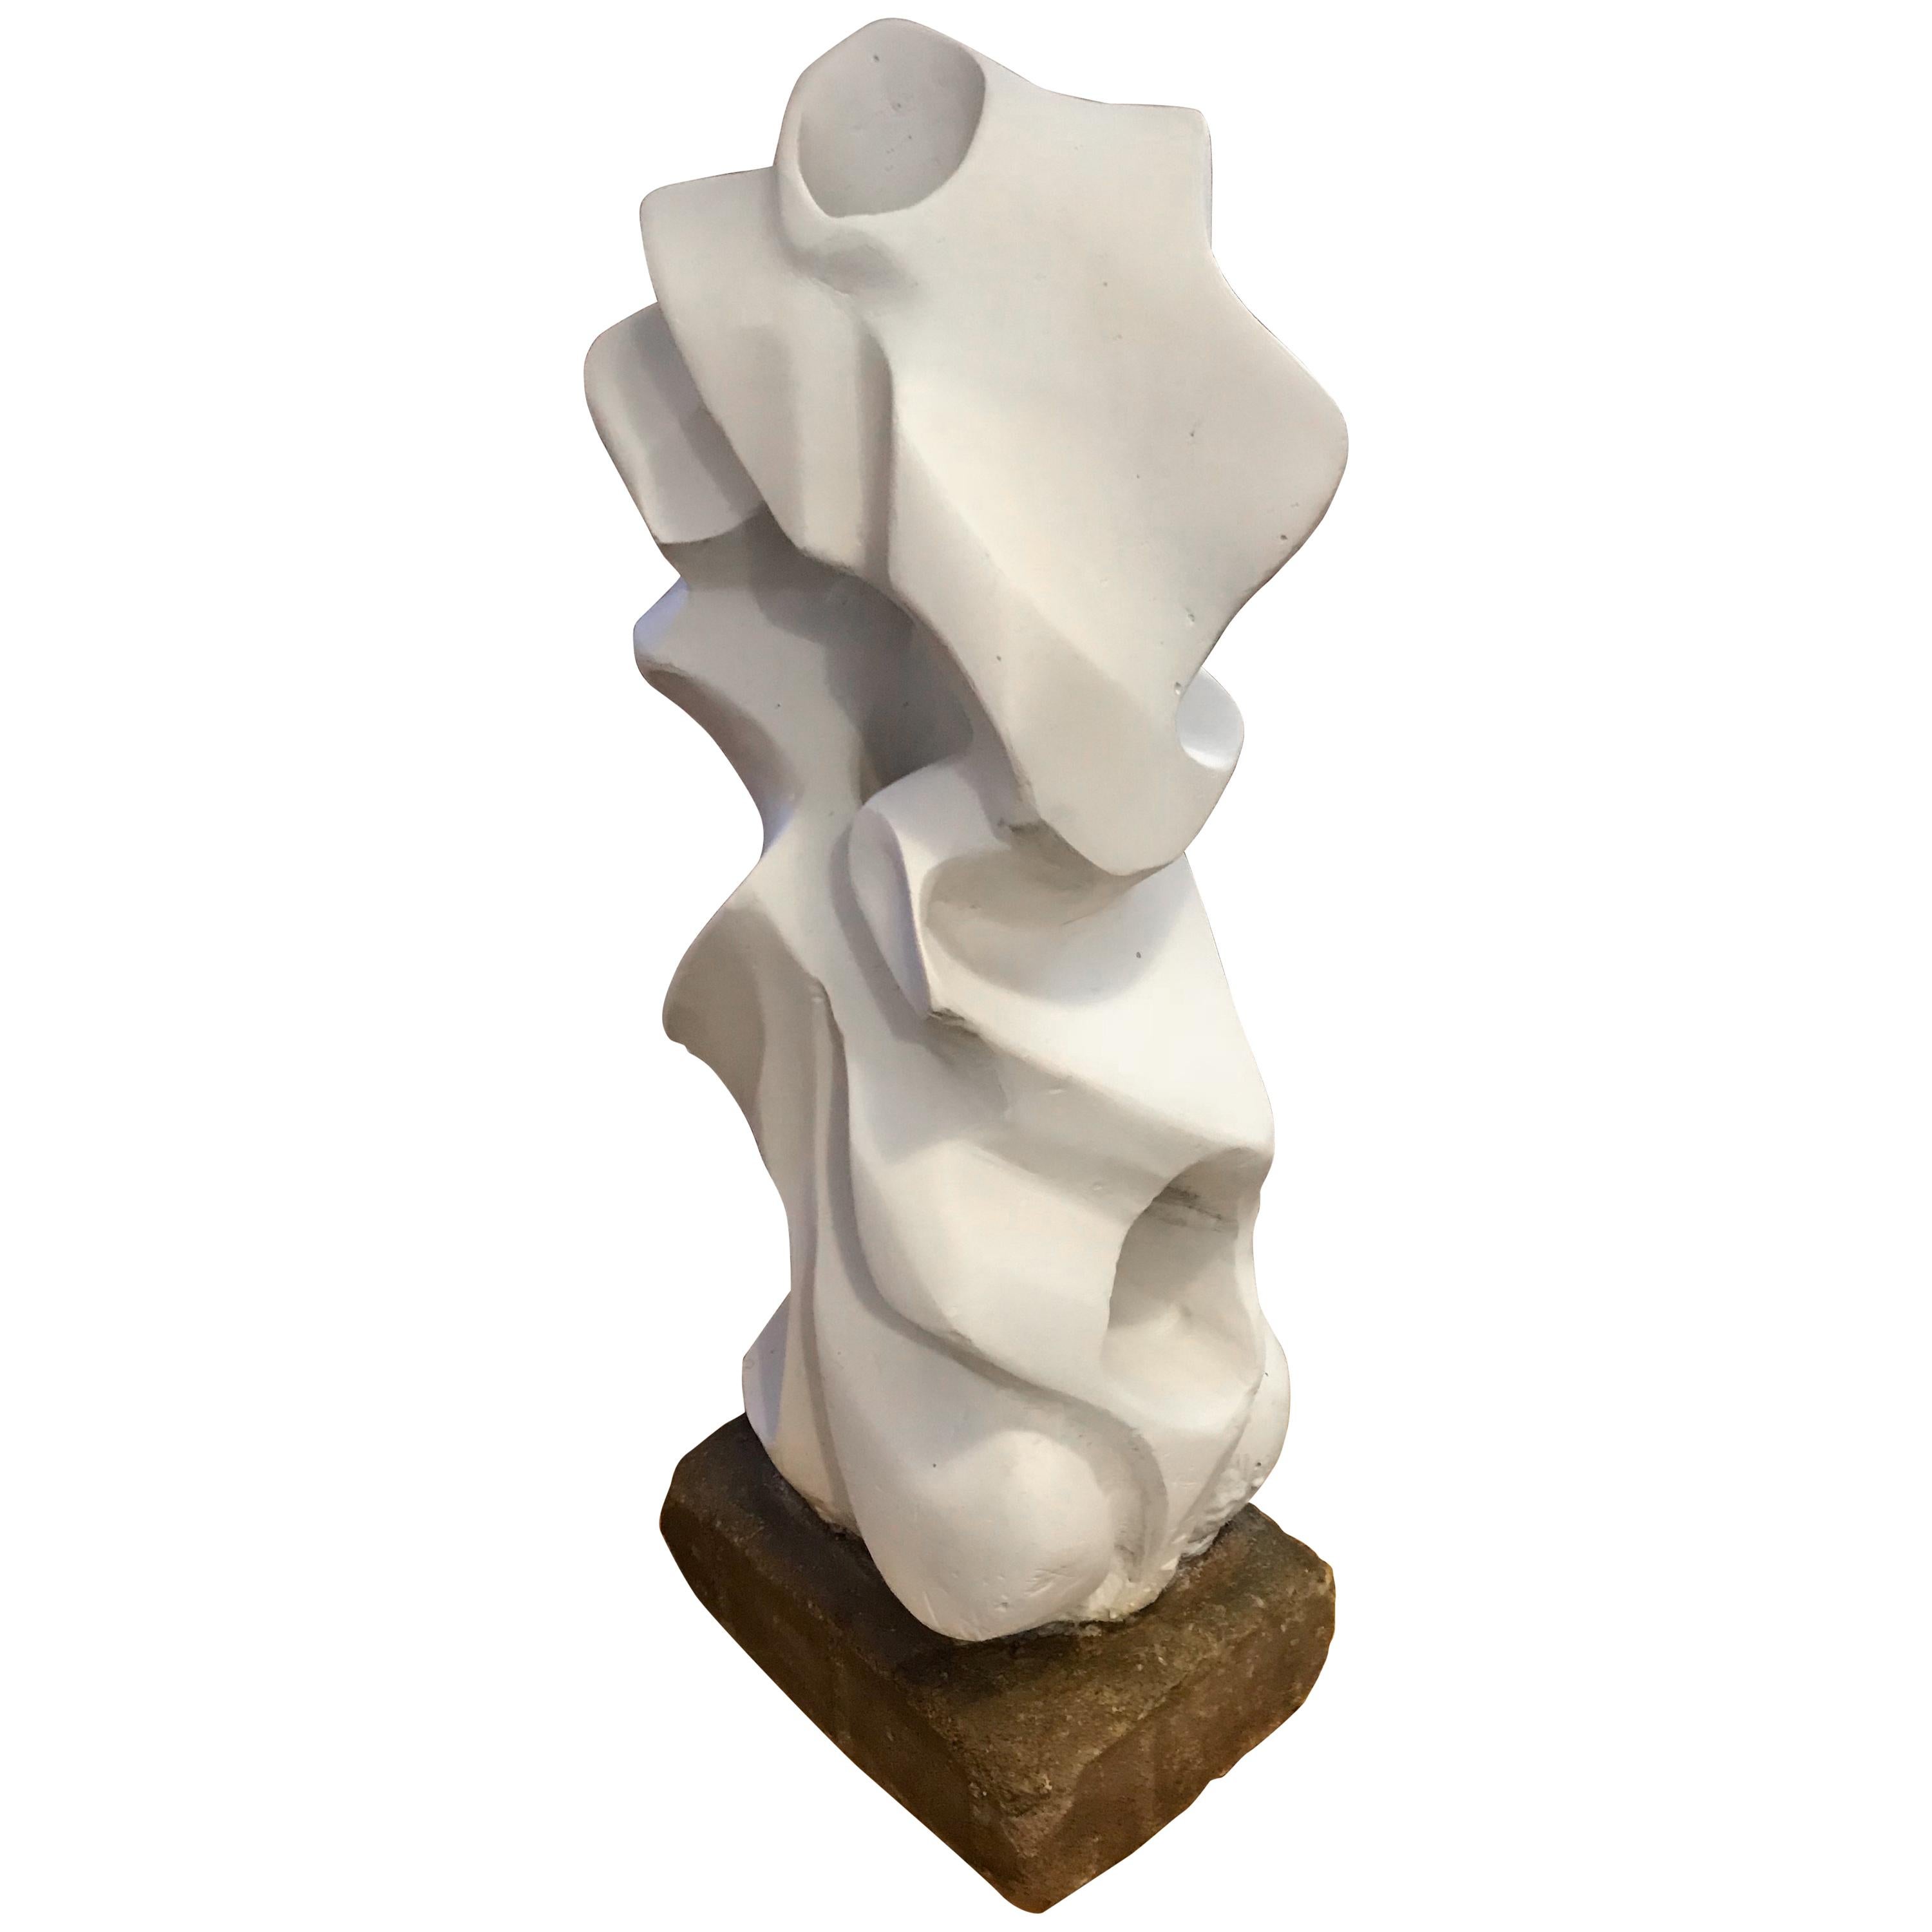 Intricate Plaster Abstract Midcentury Sculpture